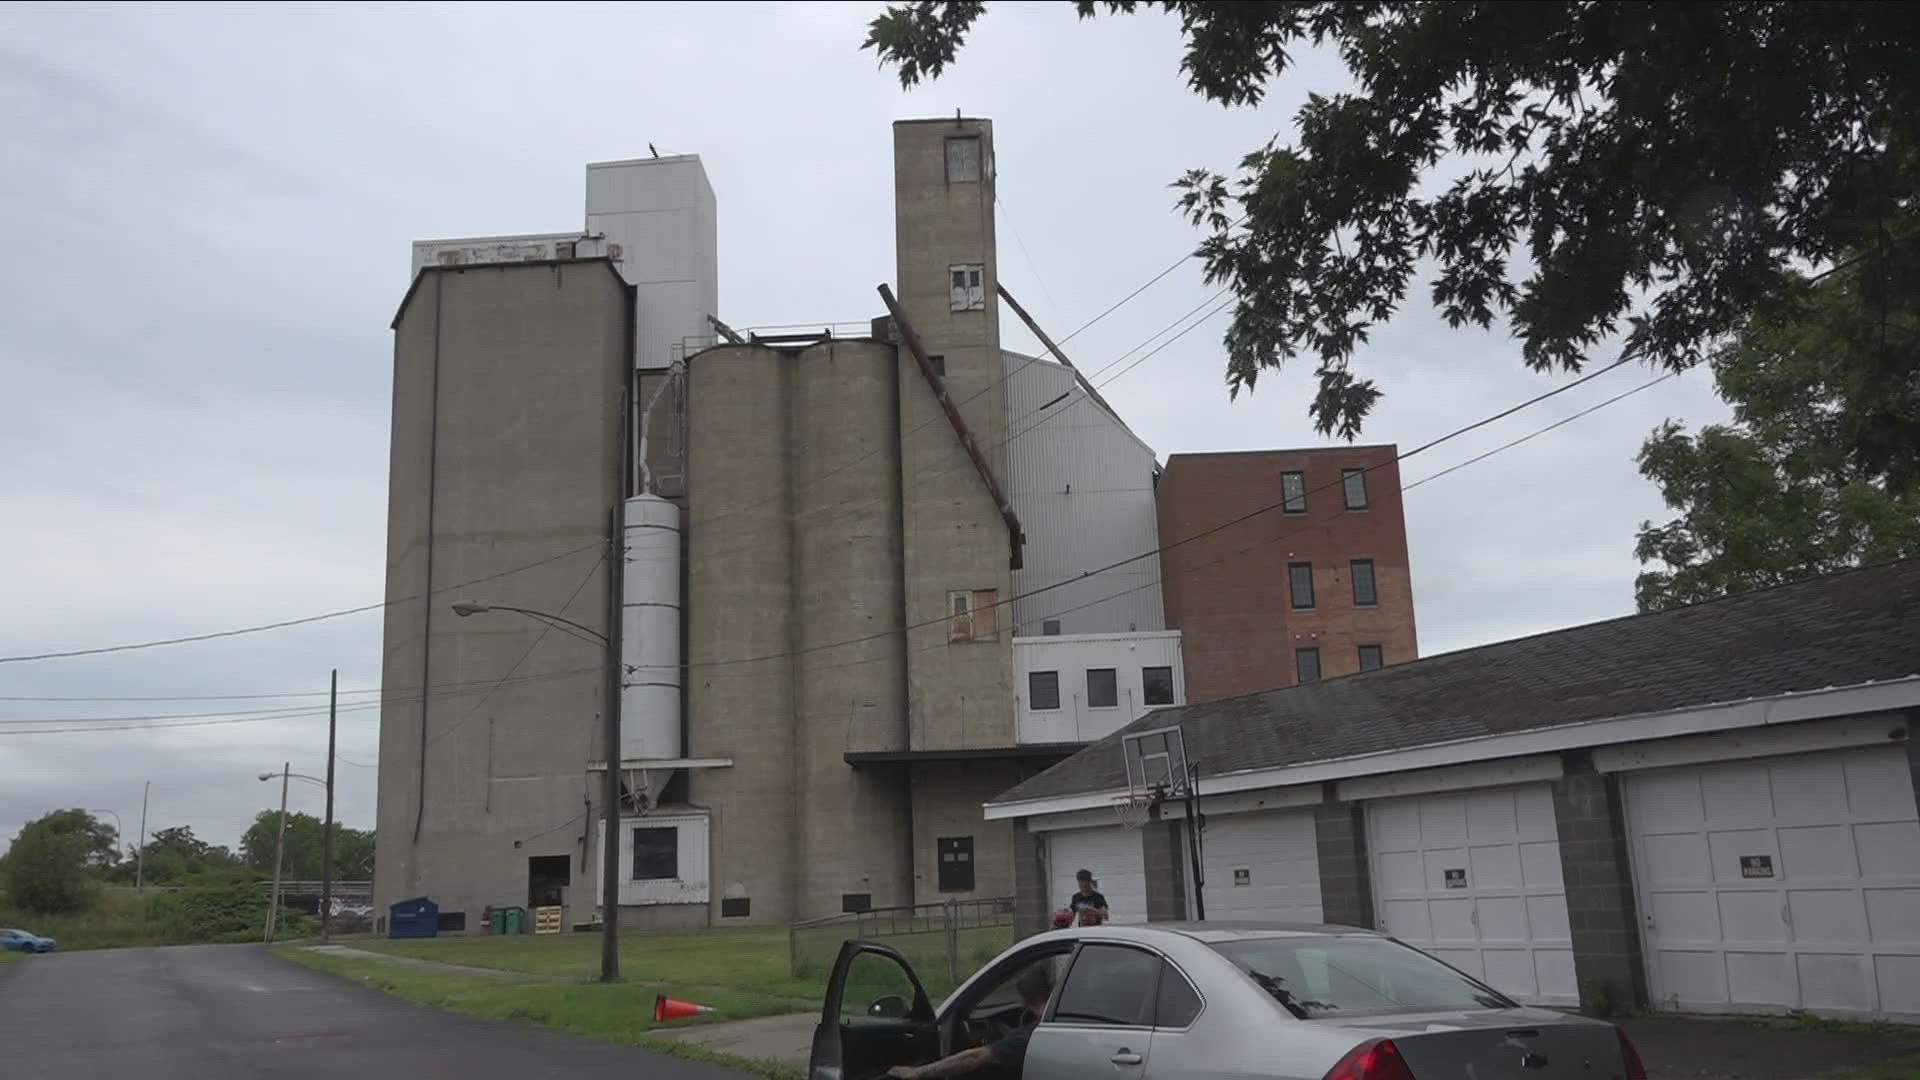 What's old is new again. That's the case when it comes to the old grain silos on Elk Street in Buffalo.